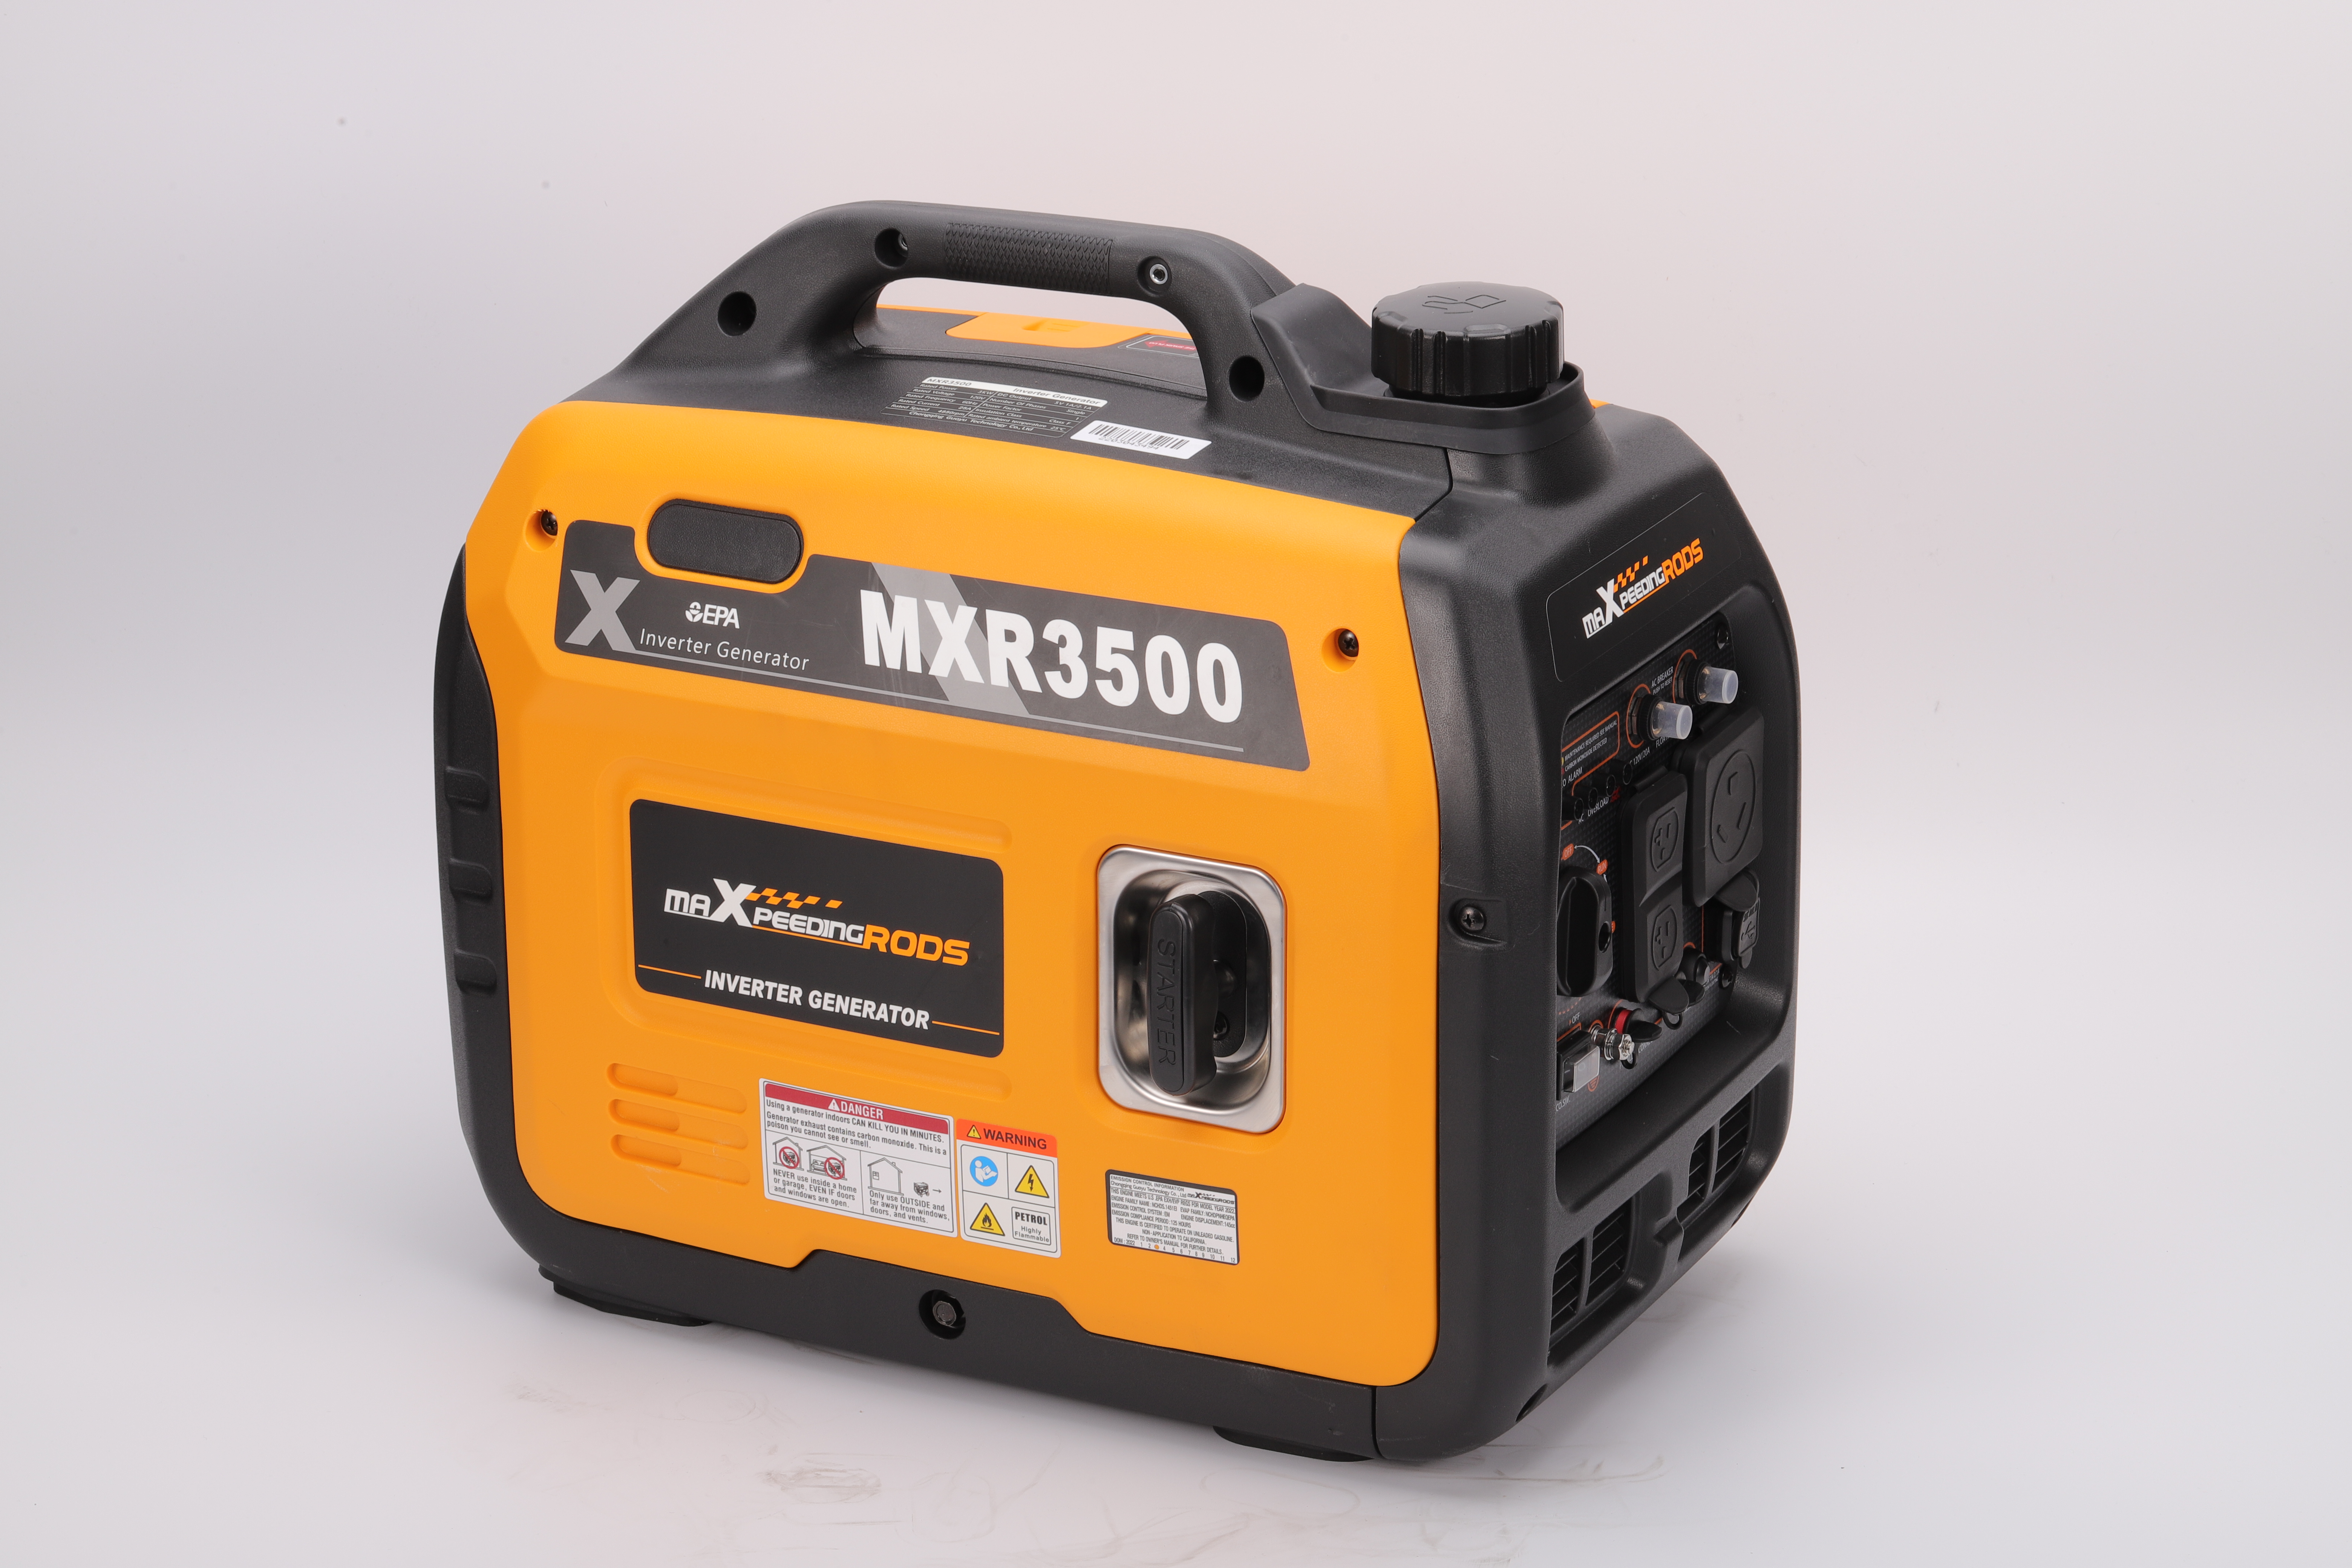 What do generator power ratings mean?